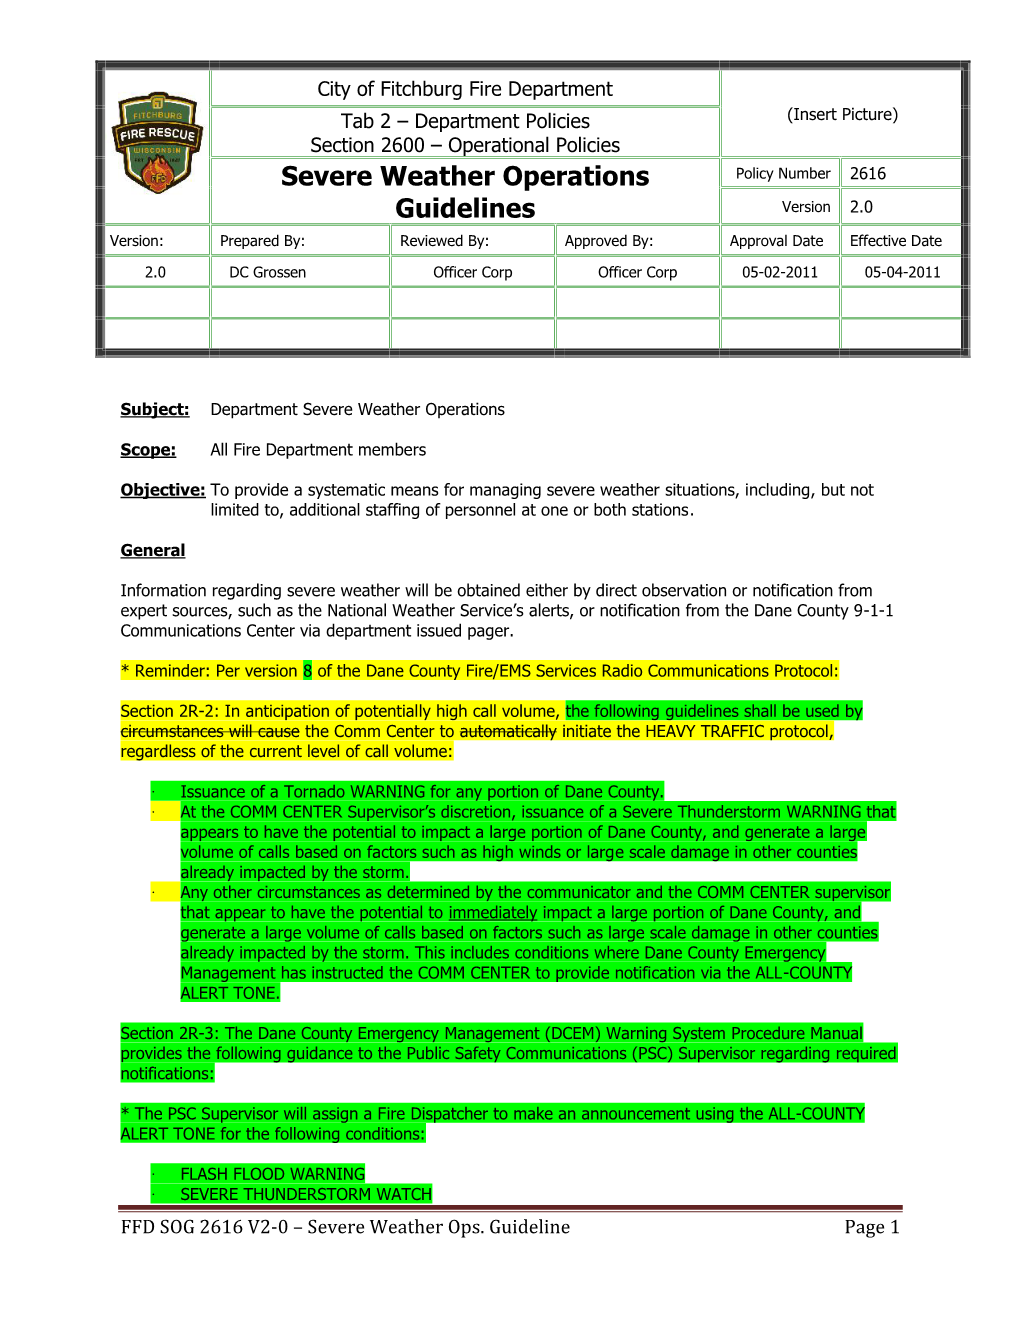 Severe Weather Operations Guidelines